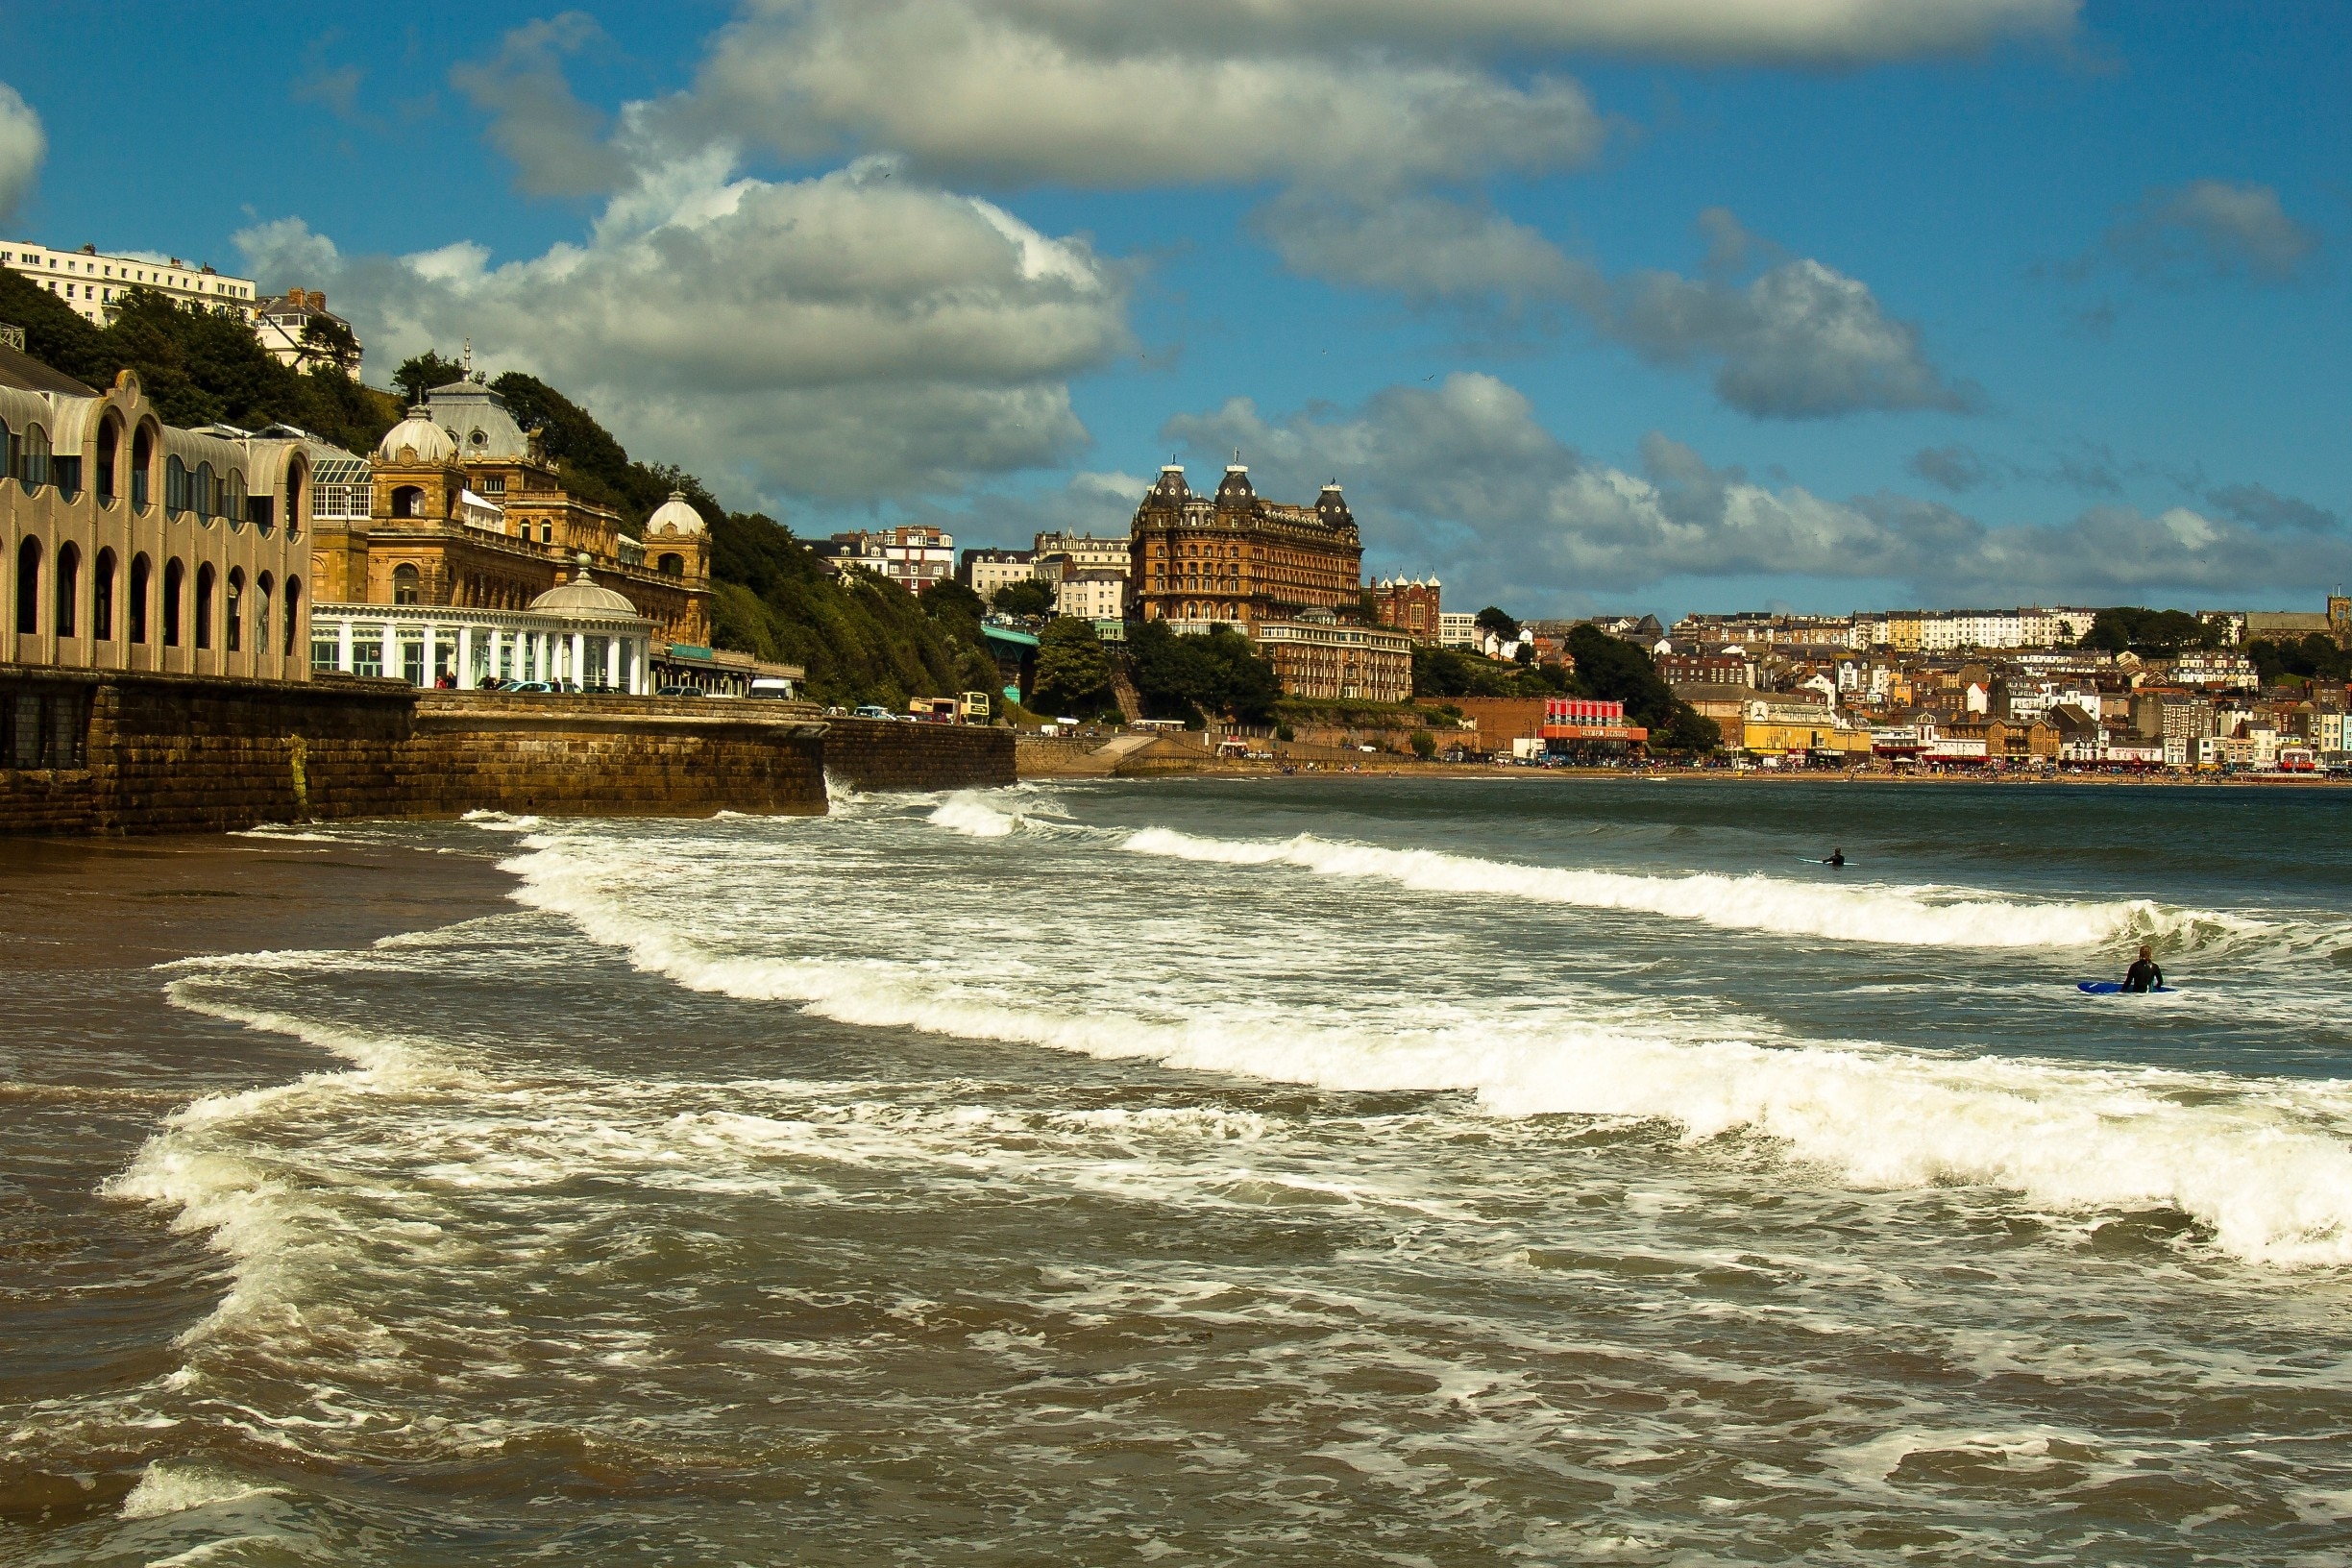 A shot taken from the beach in Scarborough south bay, the building on the left is the Spa Hall, the large building in the distance is the grand Hotel which is built on the seasons of the year. 